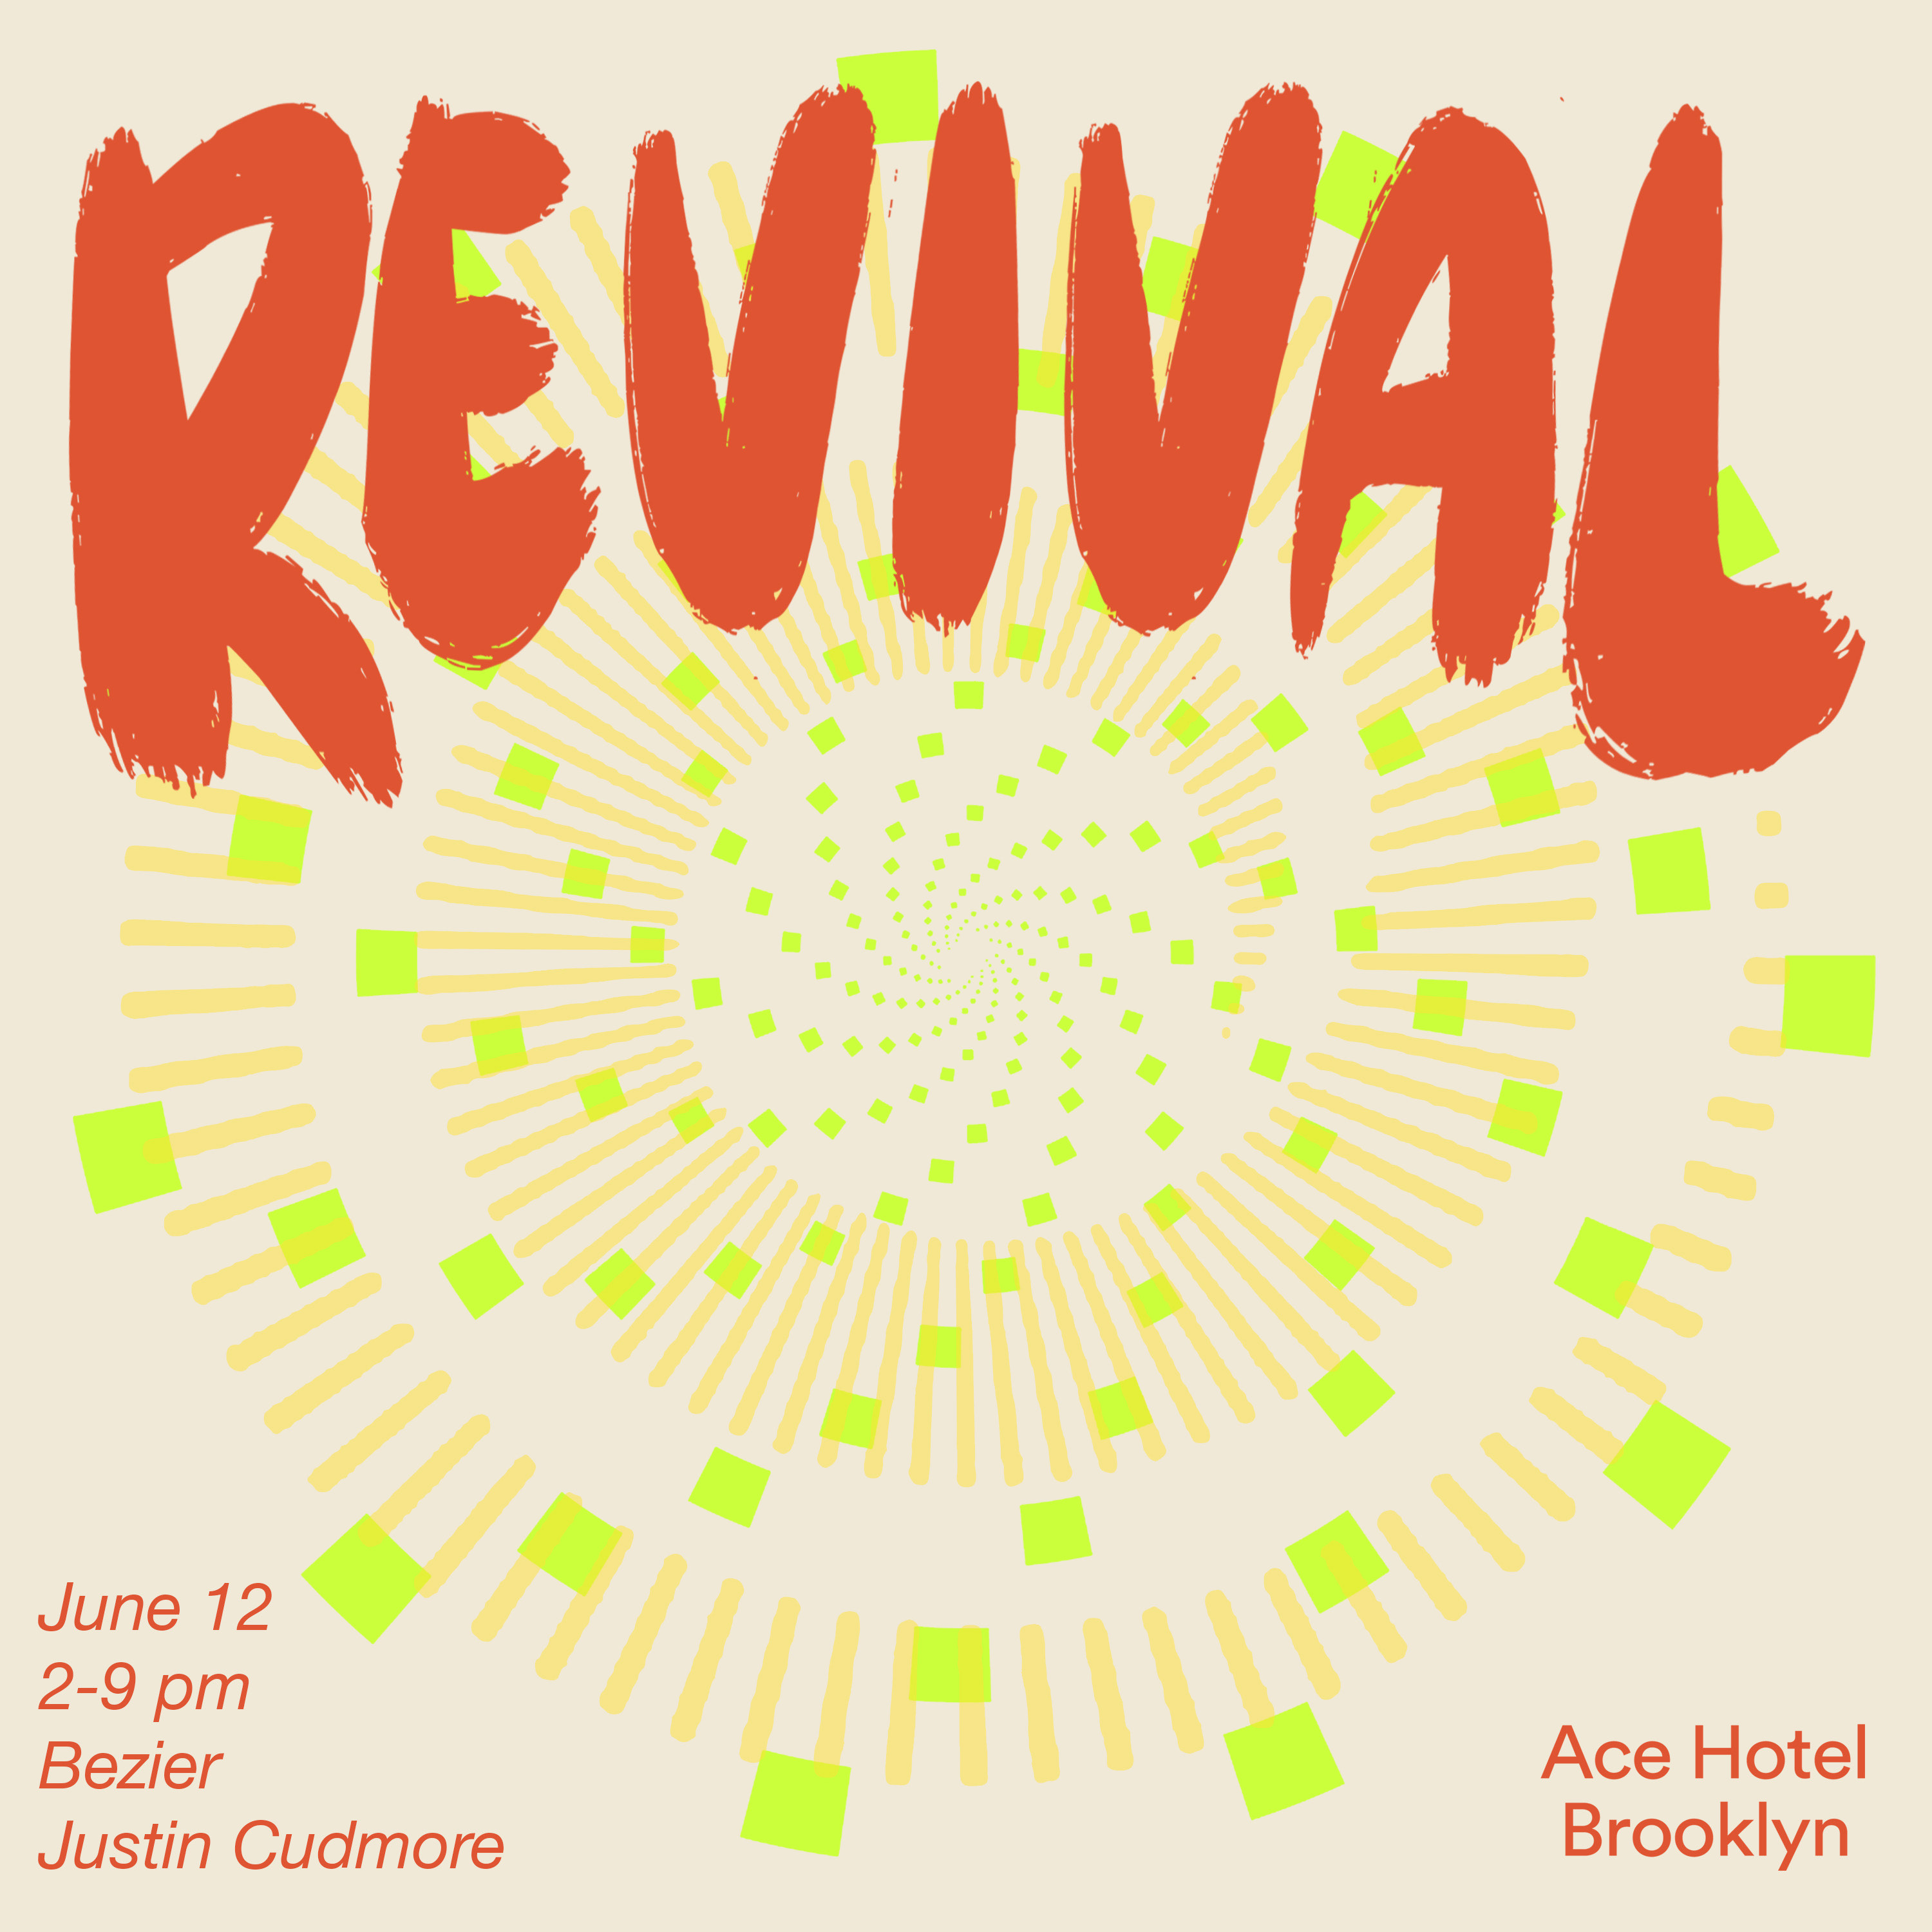 Flyer for Revival NY at Ace Hotel for Brooklyn Pride - Hue Hallums, Justin Cudmore June 12 2022 